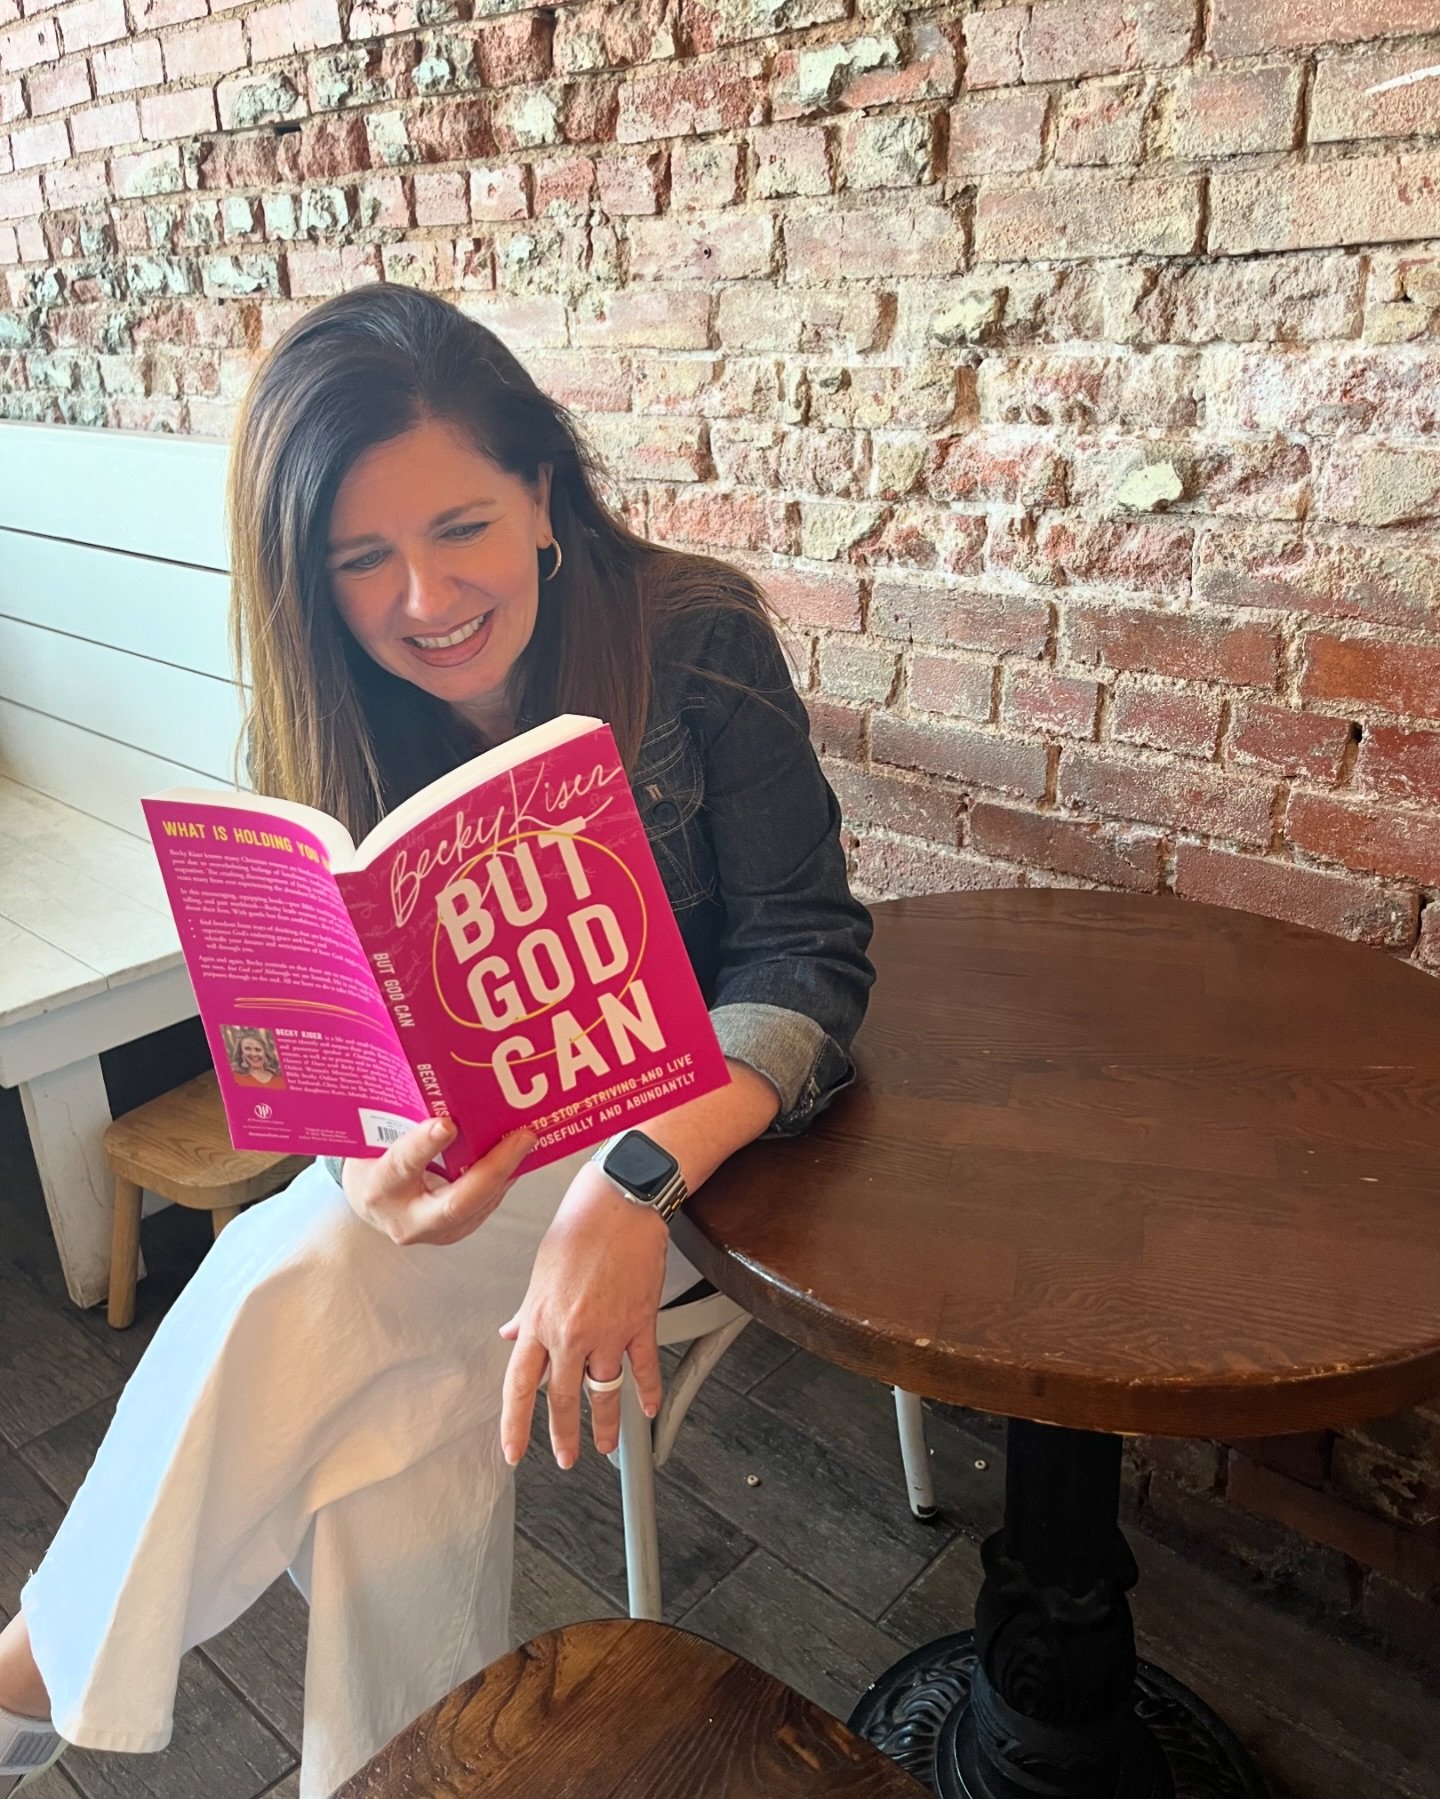 This is THE FIRST pic I&rsquo;ve seen of someone else holding this book. I cannot even tell you what seeing this did for my heart. I wanted to sob and squeak and sit stunned in shock.

One more week until it&rsquo;s out for everyone. May 7.

@tistash